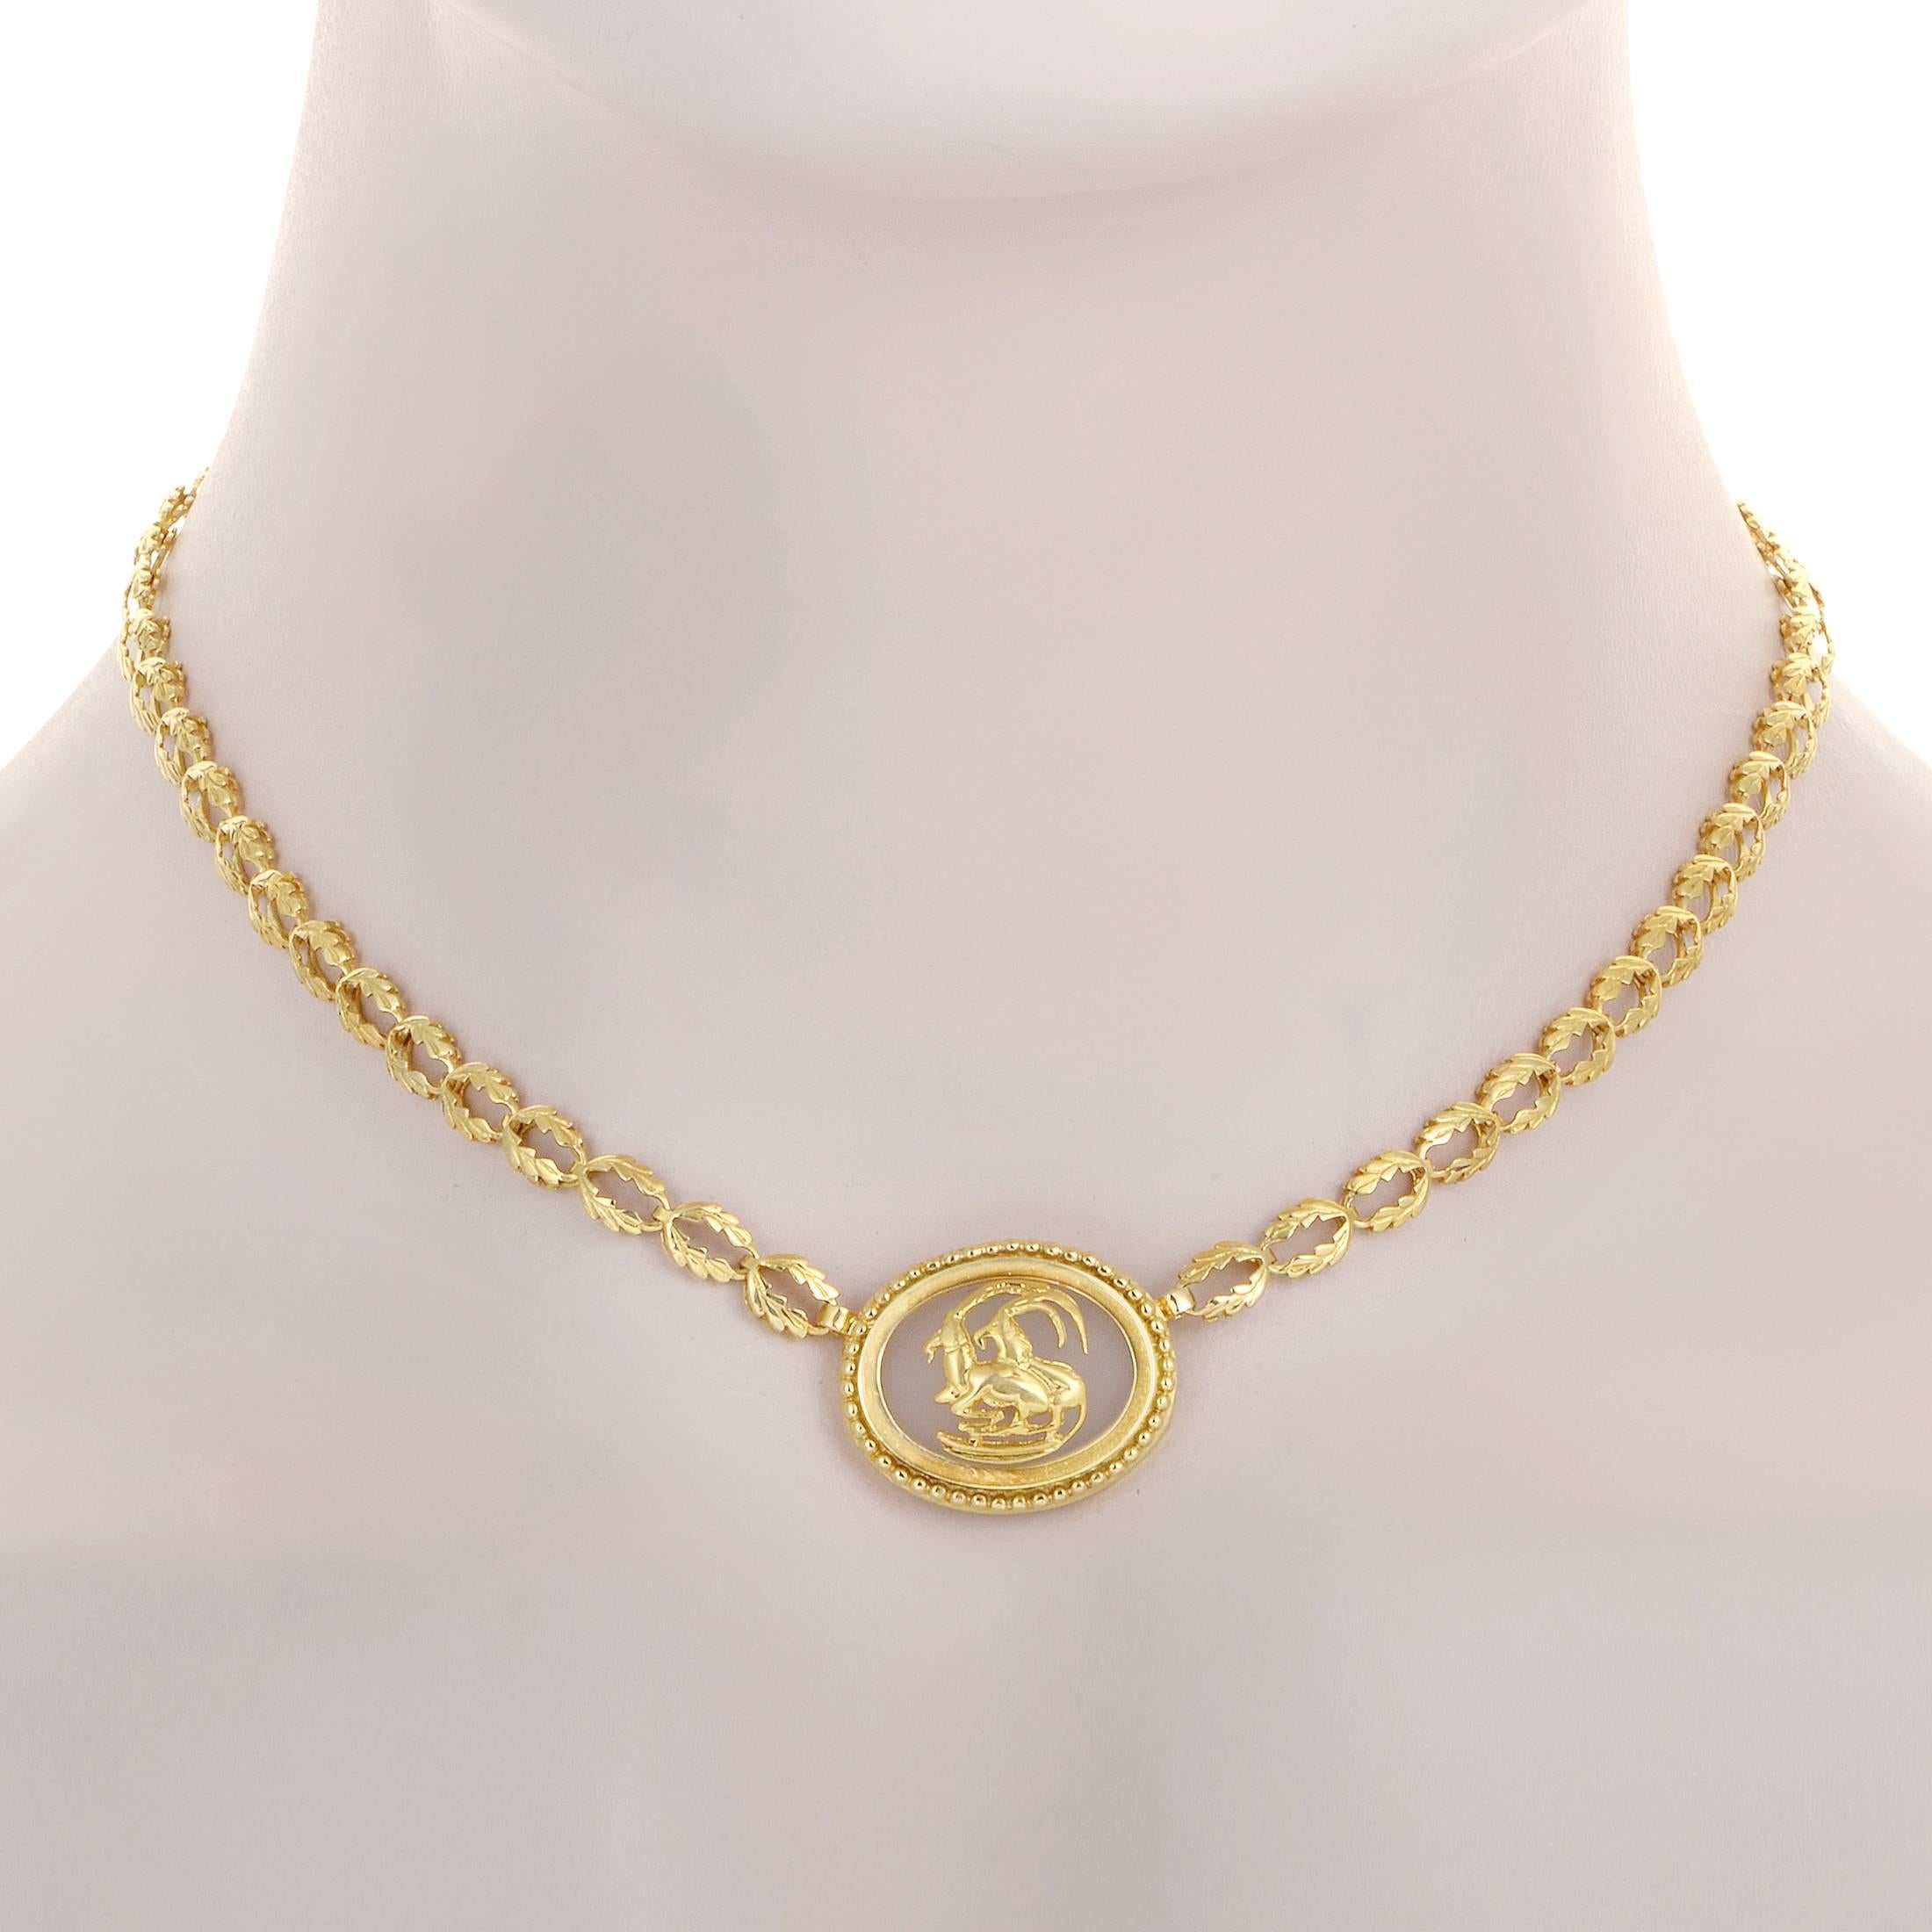 Focusing purely on the fabulous inherent allure of 18K yellow gold and the extraordinary shapes created by exquisite crafting of this precious metal, Ilias Lalaounis presented this astonishing necklace that boasts a compelling design of the chain